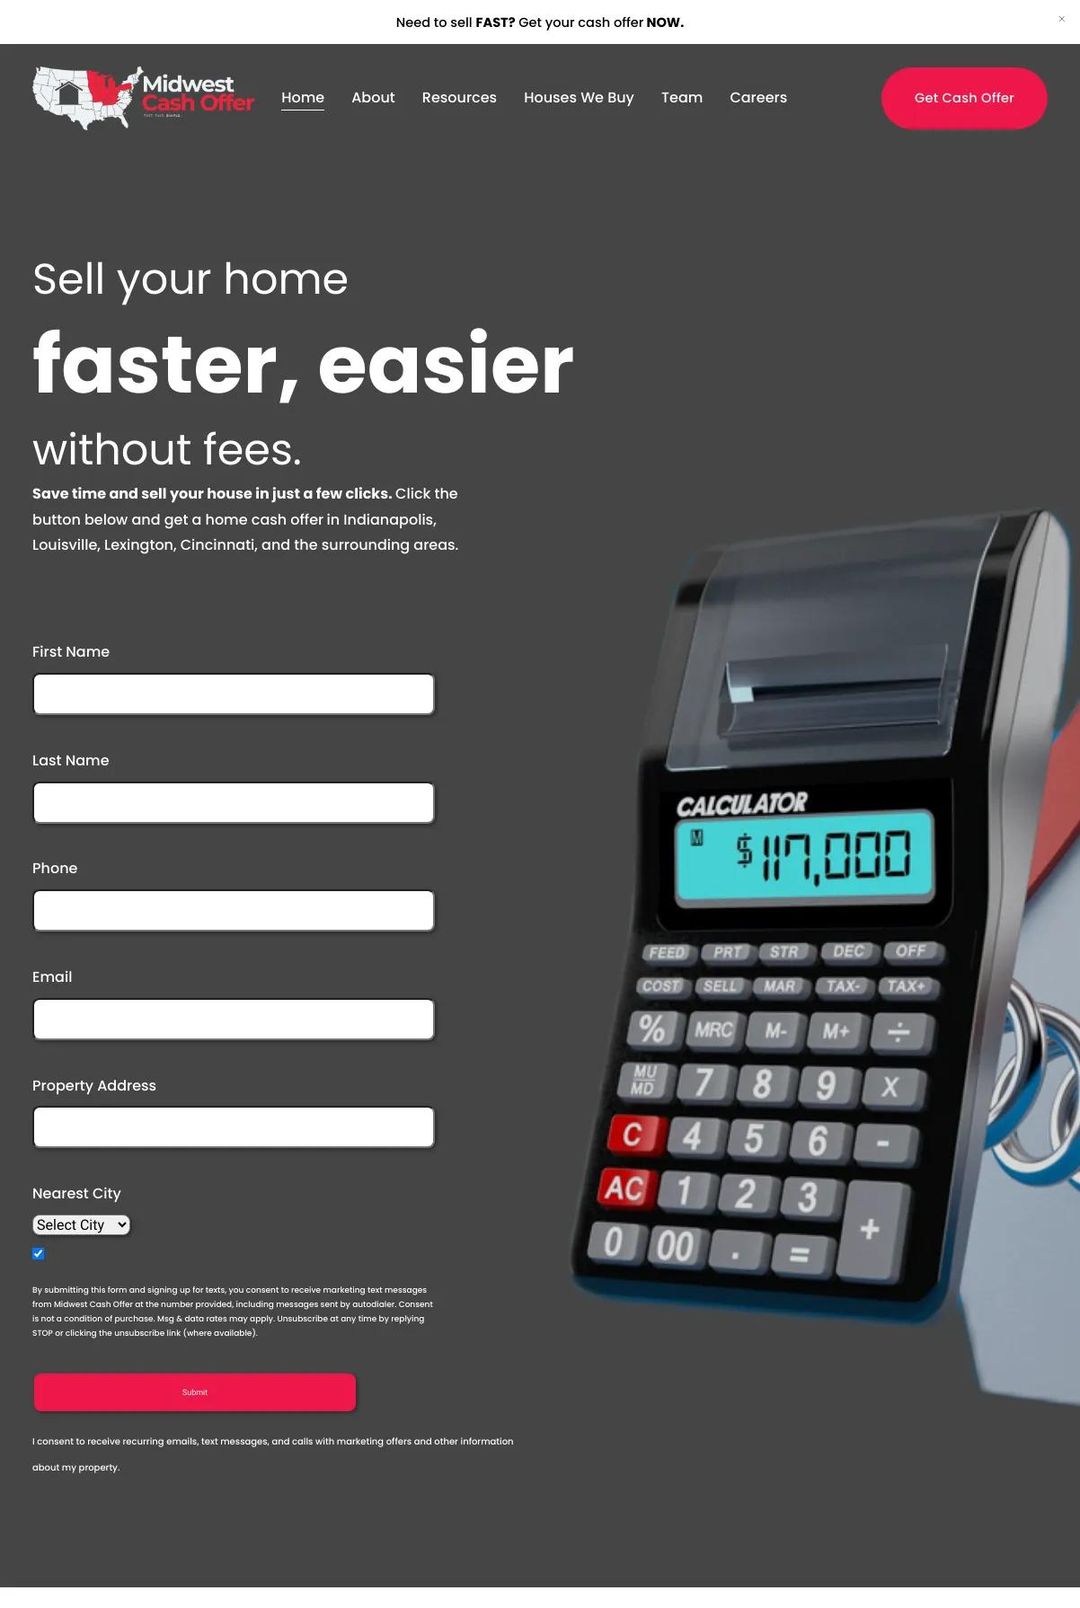 Screenshot 1 of Midwest Cash Offer (Example Squarespace Real Estate Website)